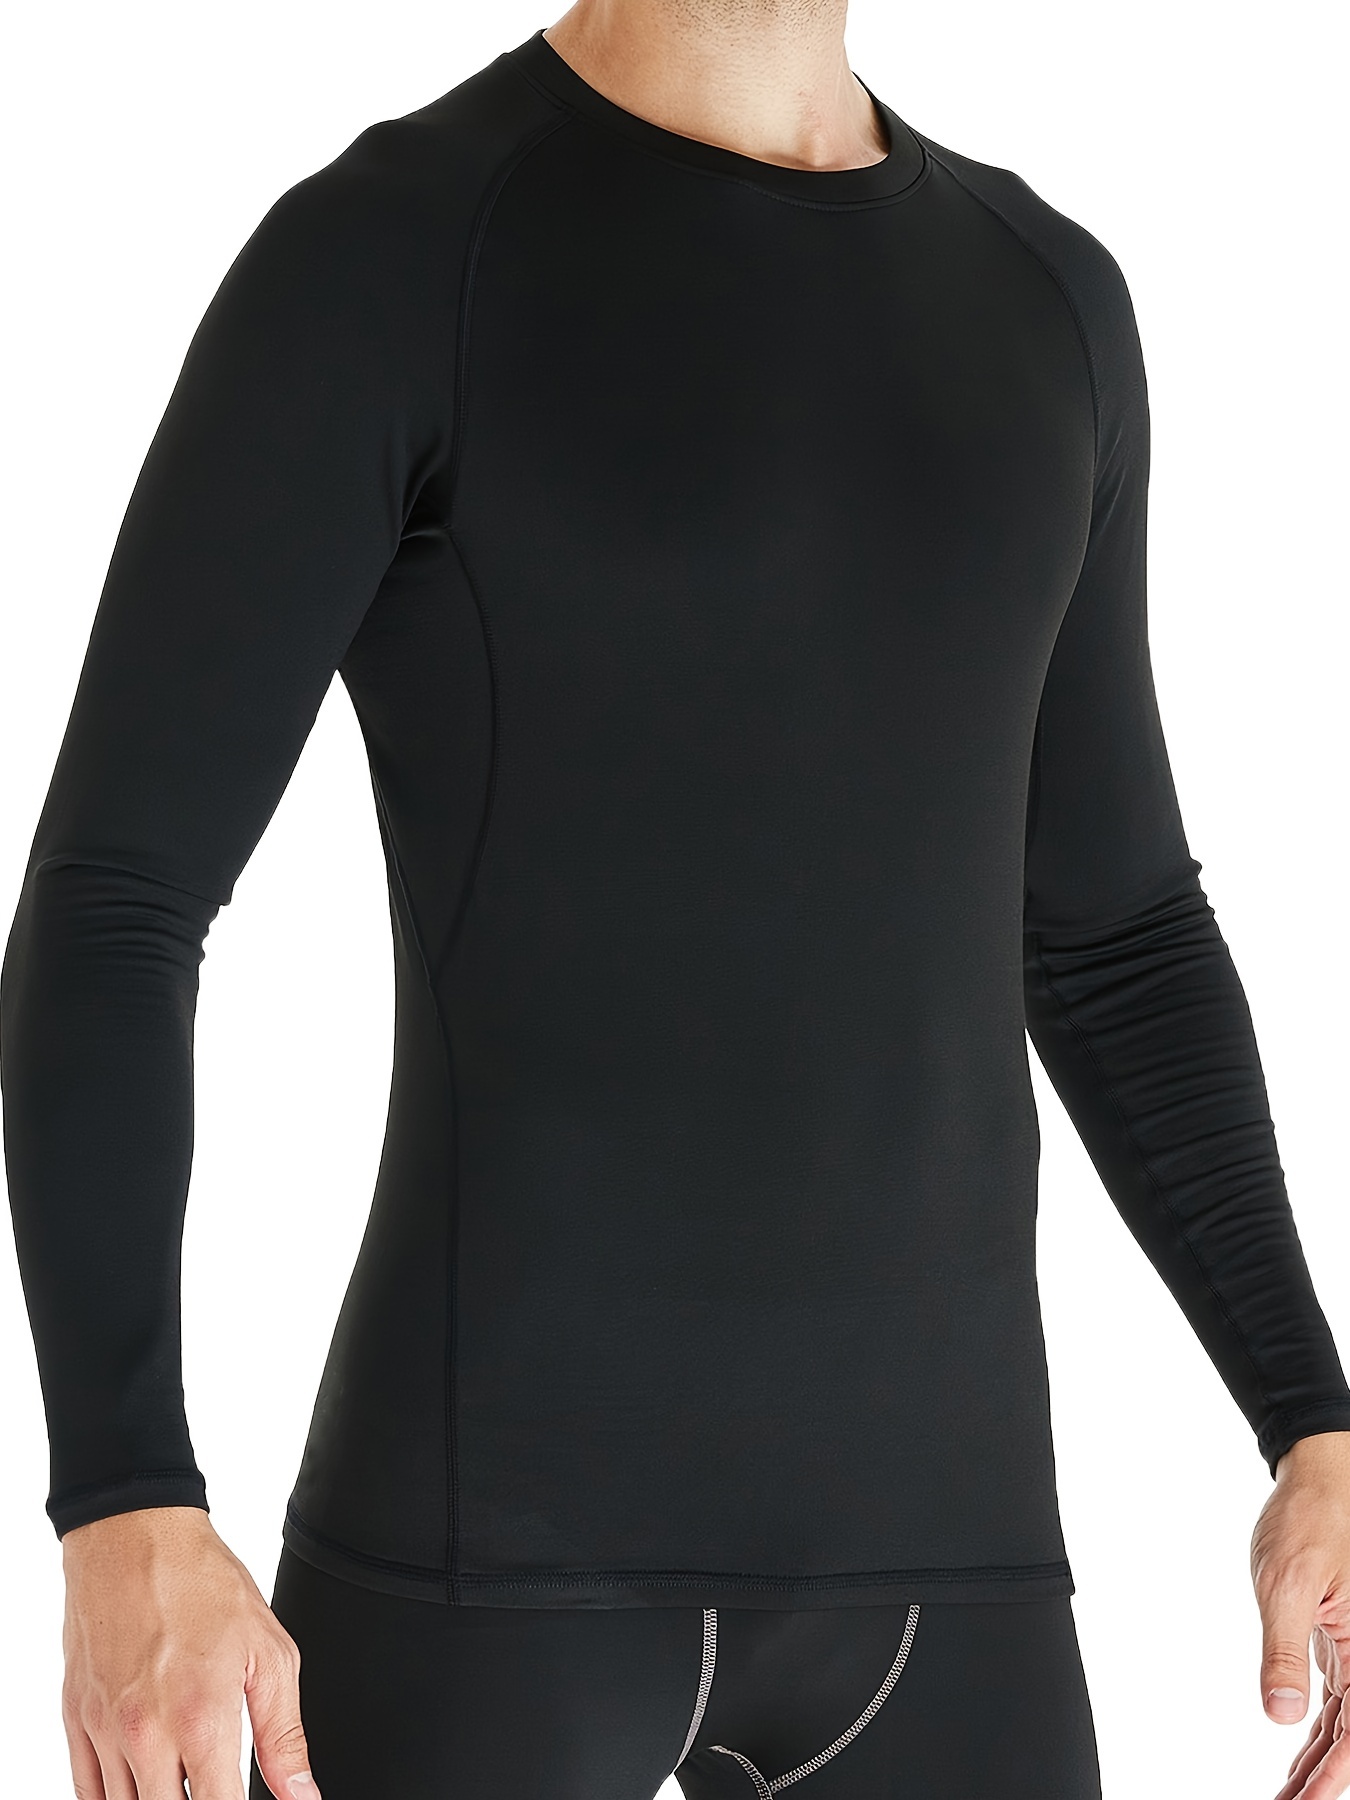 Workout Ready Compression Long Sleeve Shirt in night black